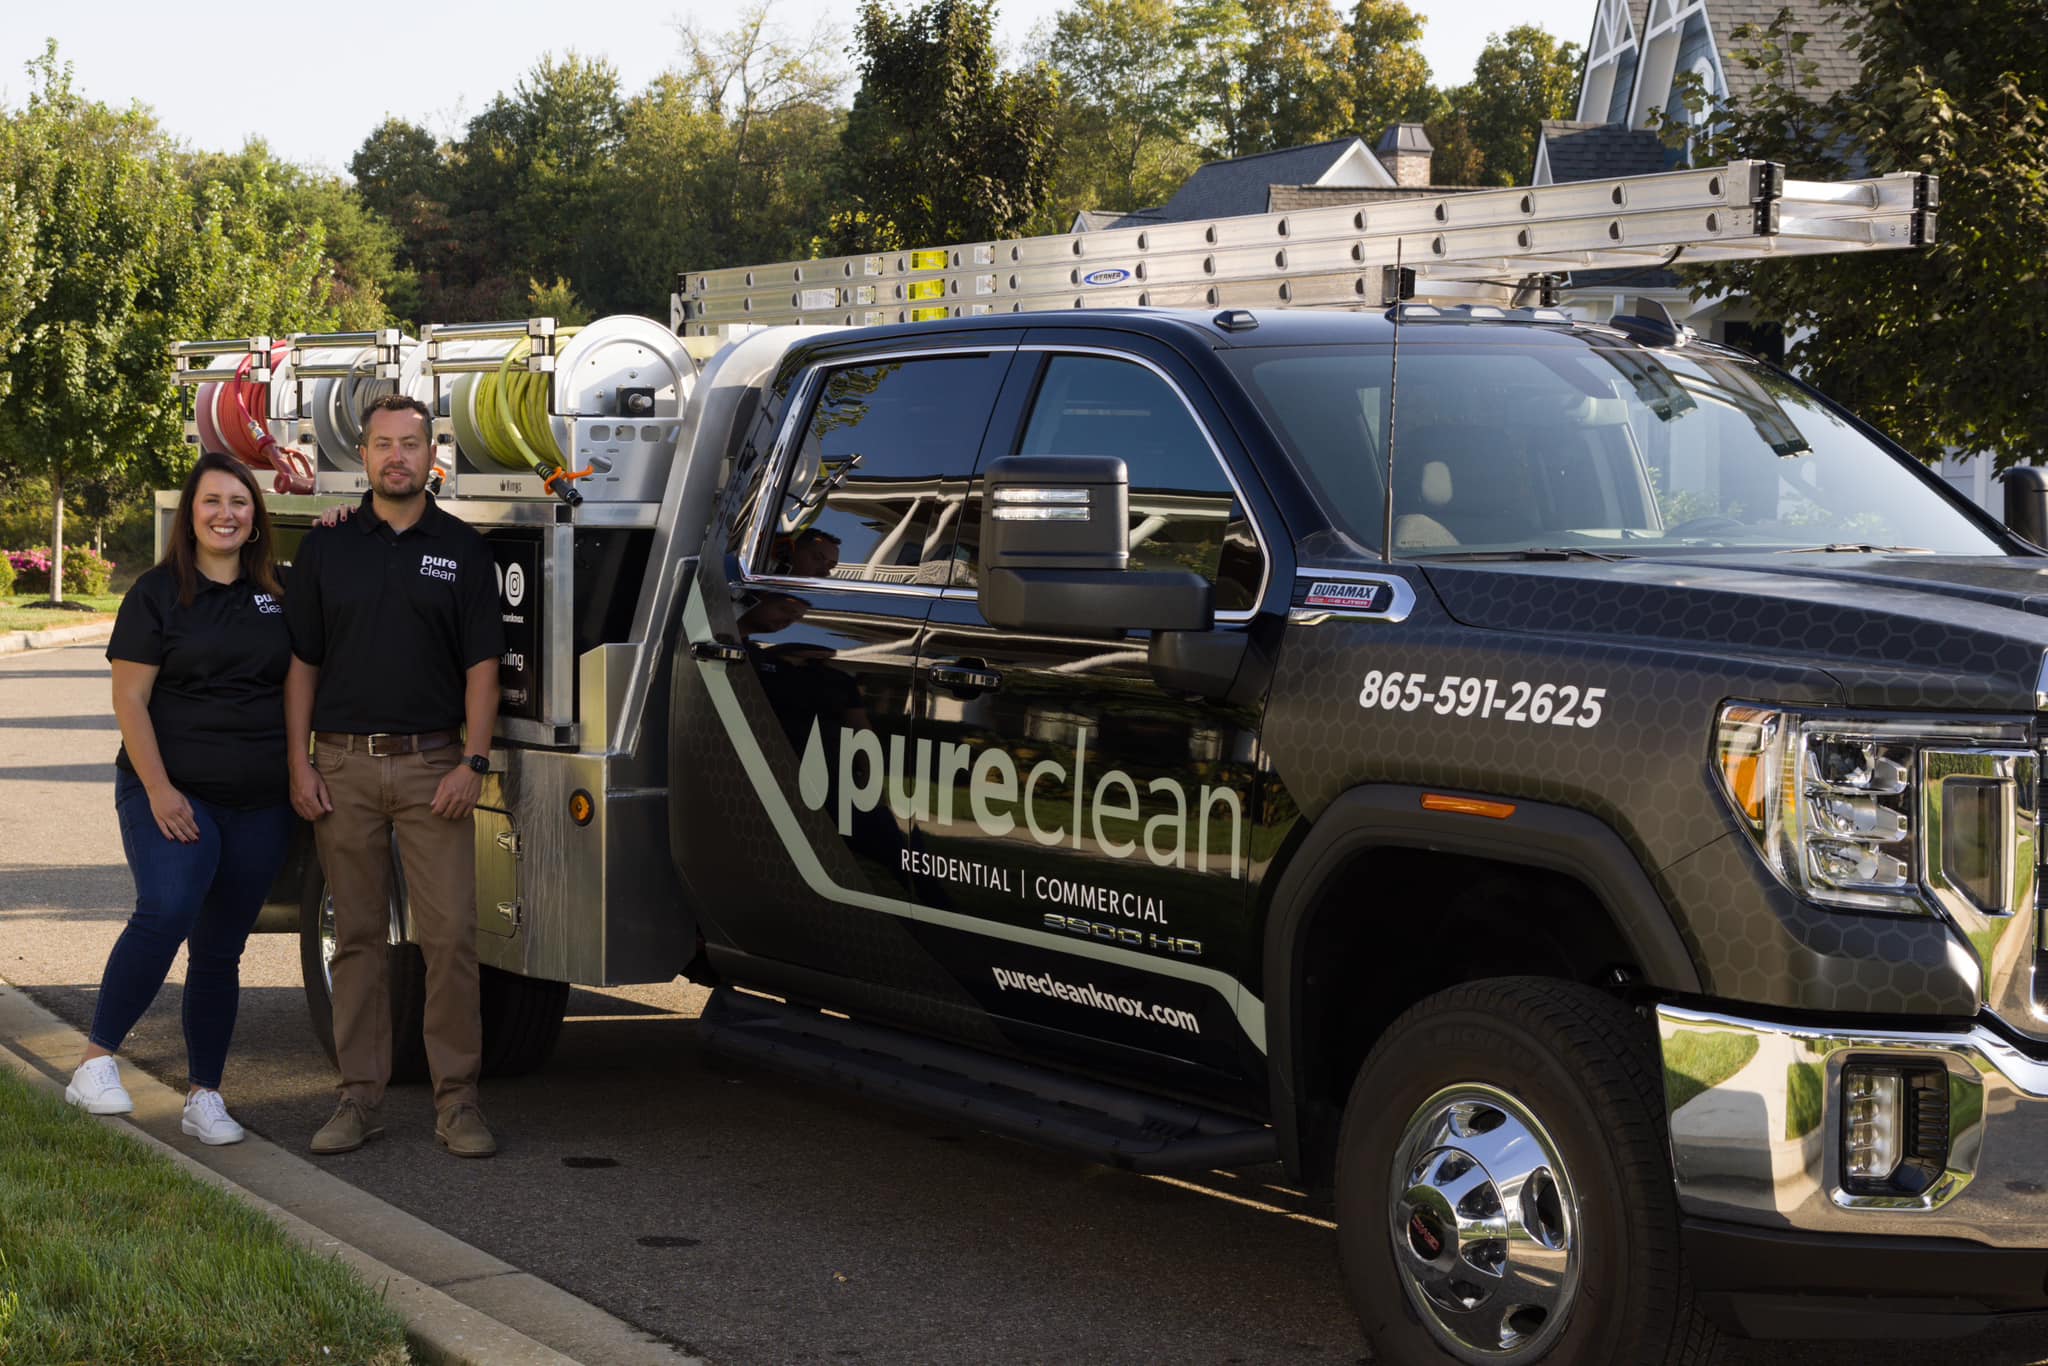 image of pure clean knoxville truck and brittany and lance ford